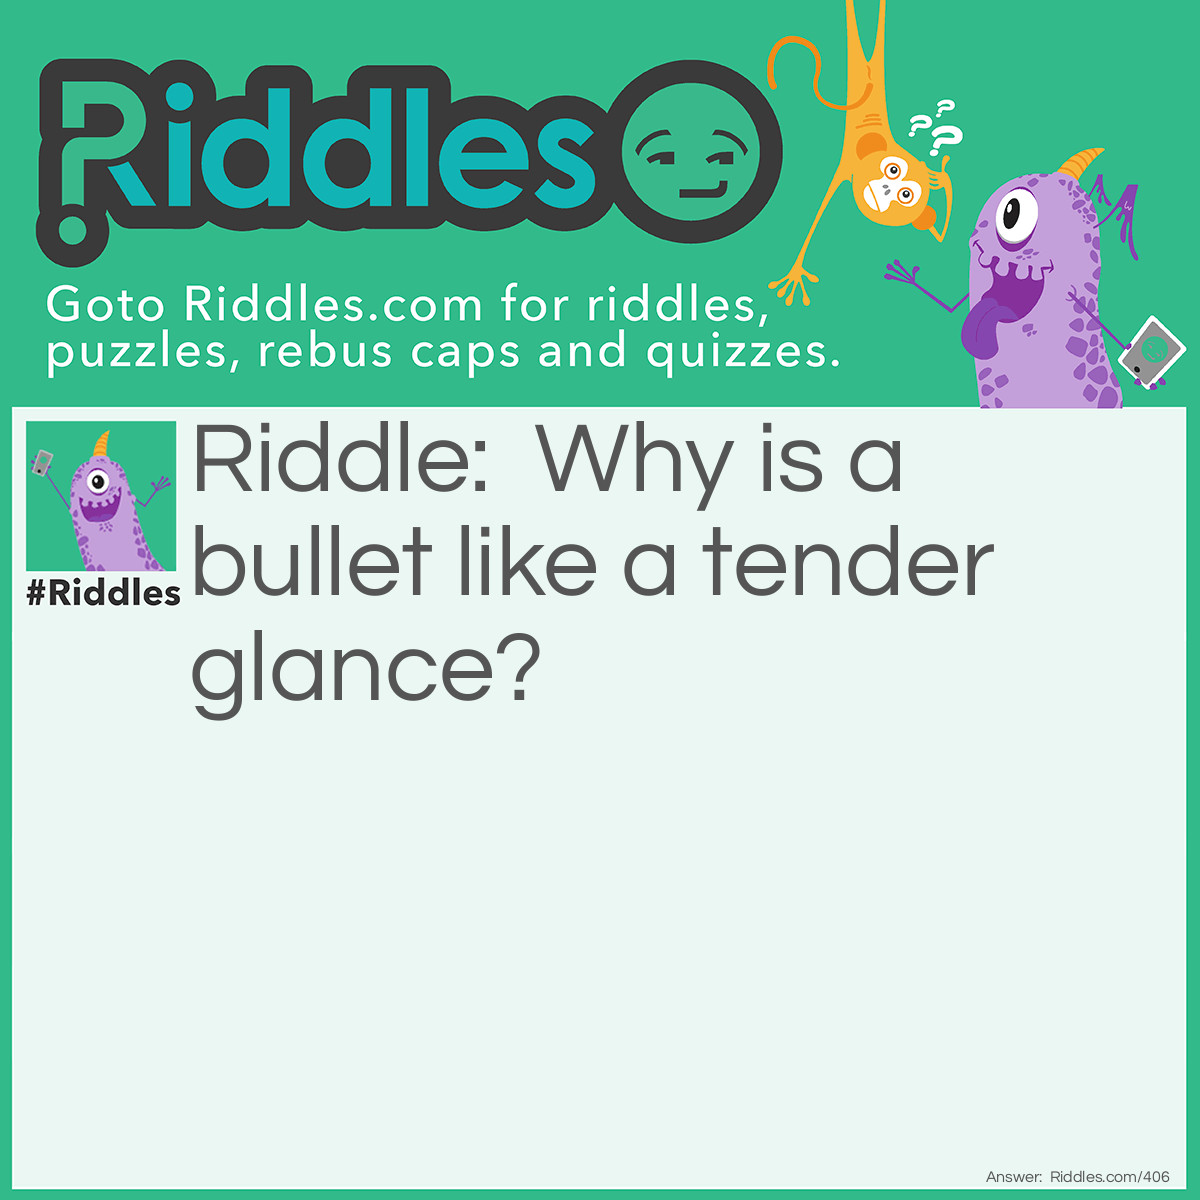 Riddle: Why is a bullet like a tender glance? Answer: Because it pierces hearts.